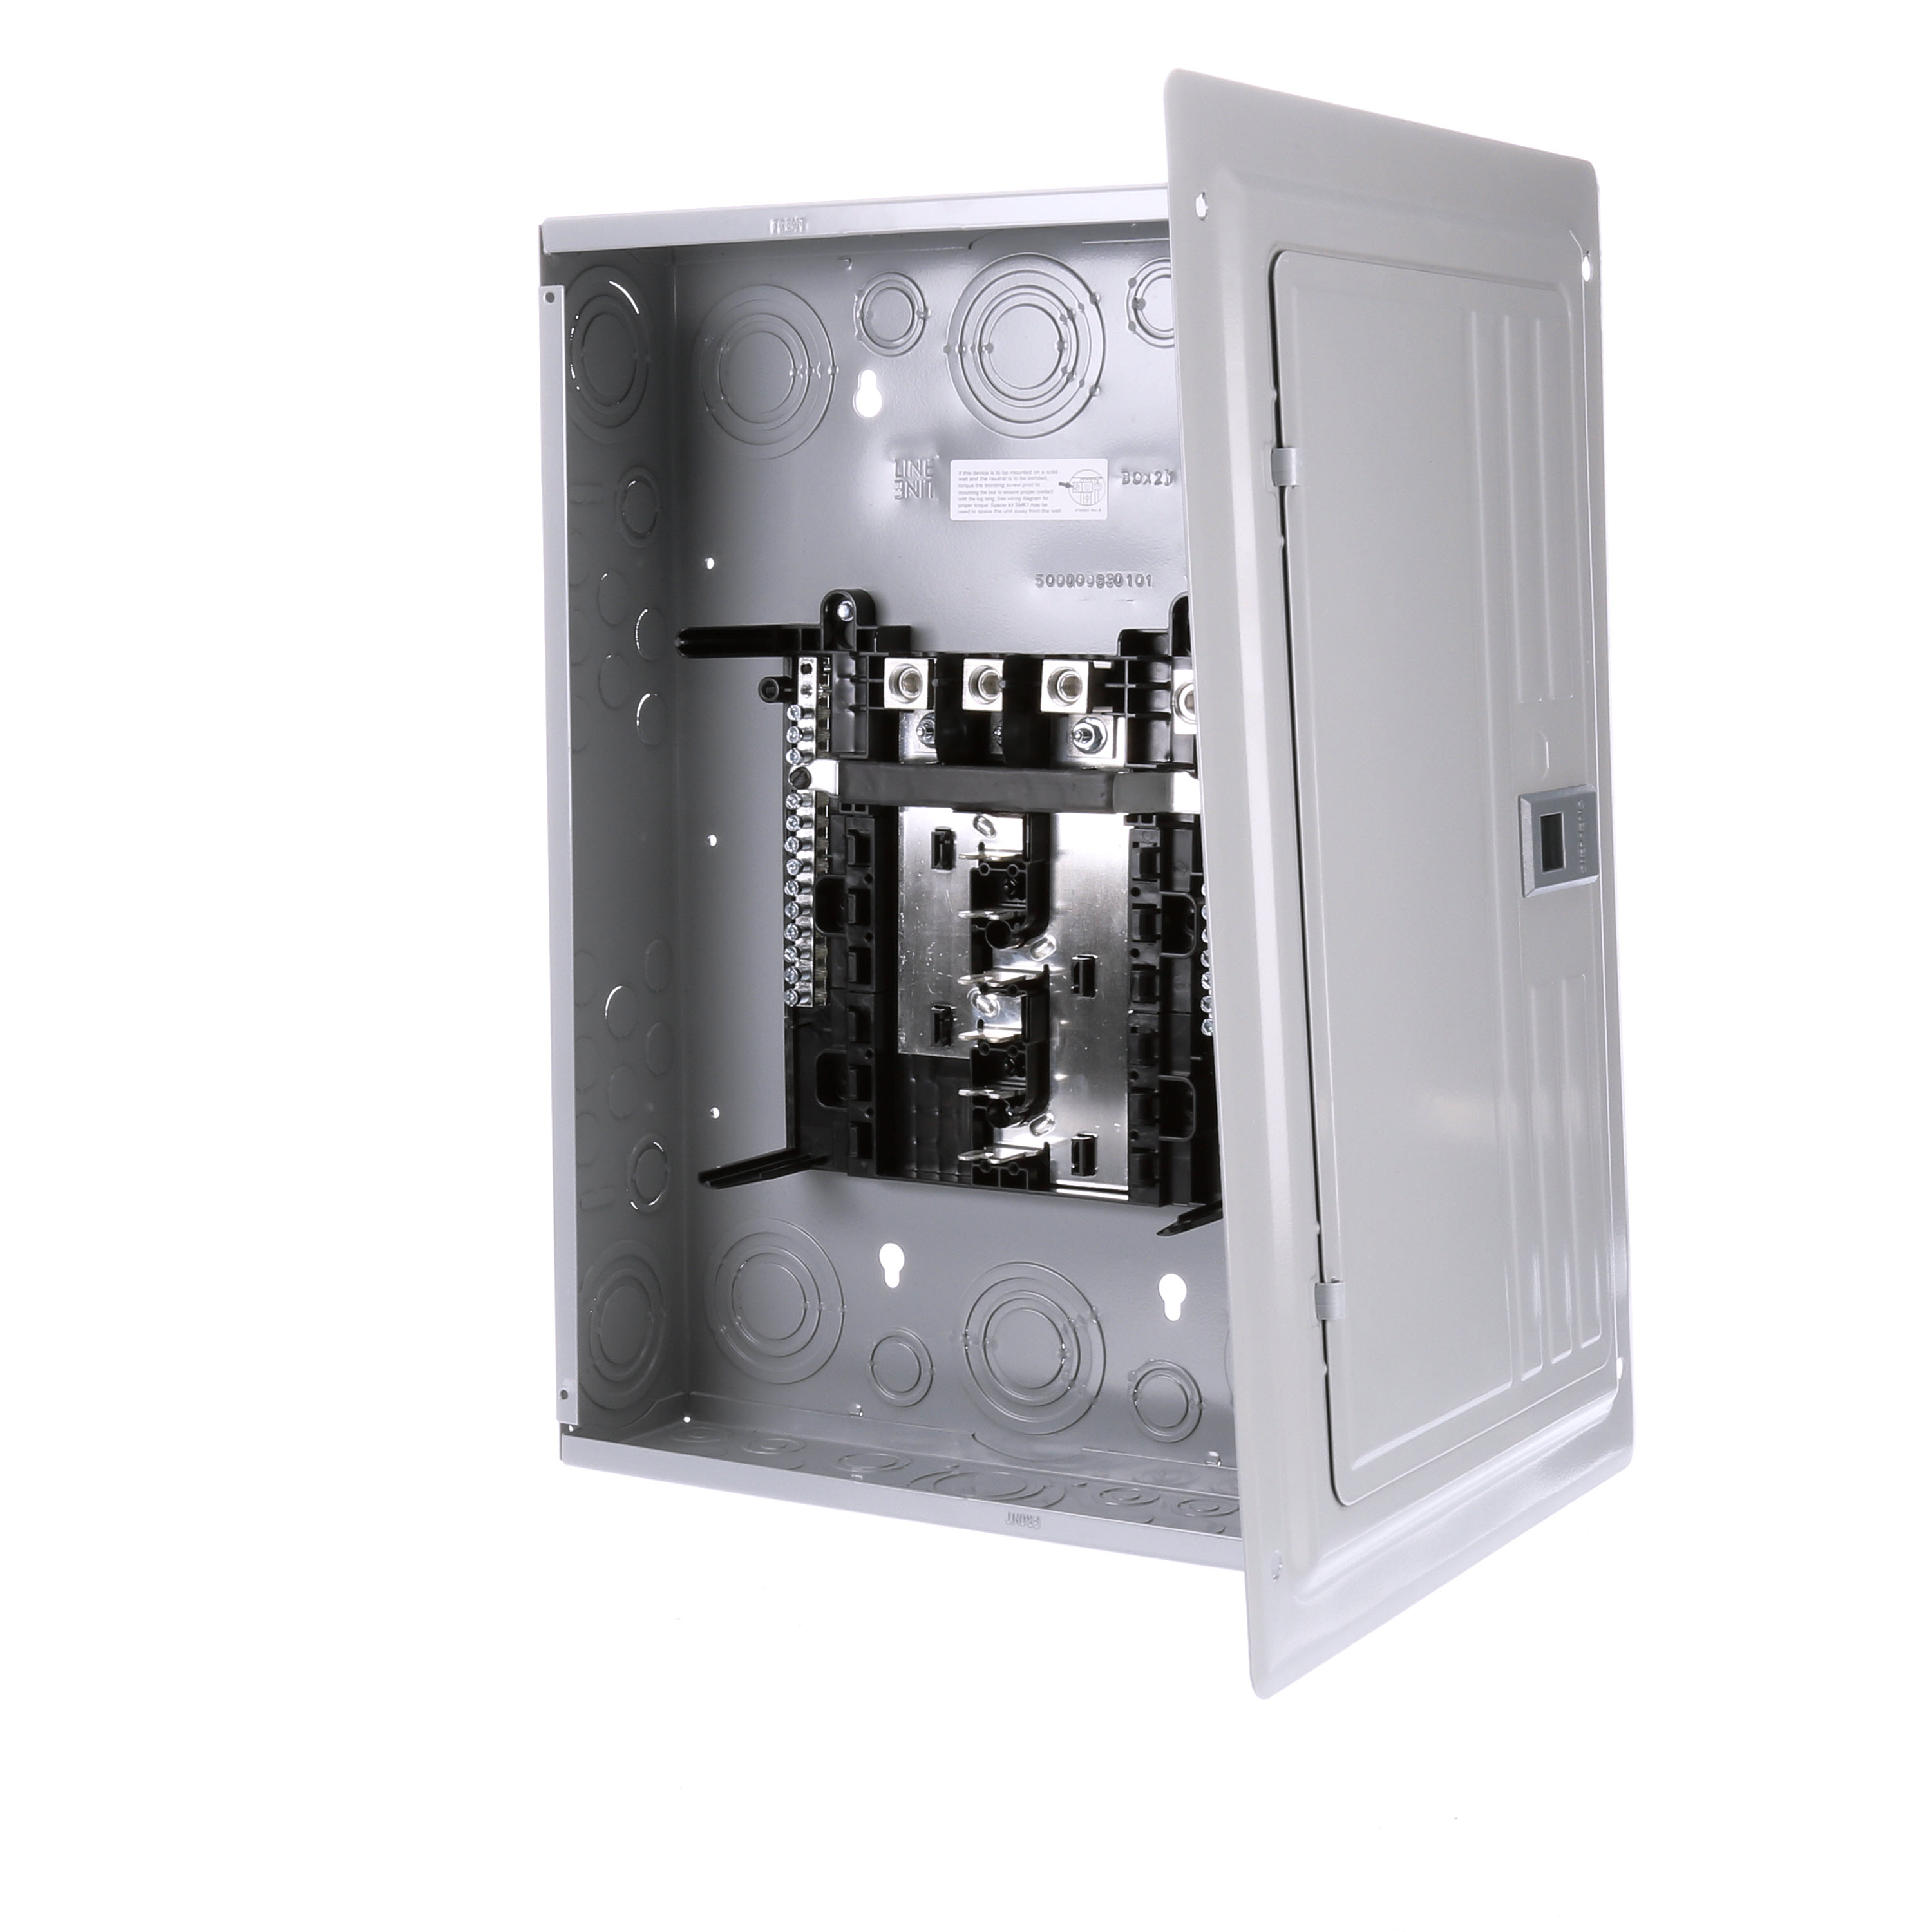 SIEMENS LOW VOLTAGE ES SERIES LOAD CENTER. MAIN LUG WITH 12 1-INCH SPACES ALLOWING MAX 24 CIRCUITS. 3-PHASE 4-WIRE SYSTEM RATED 120/240V OR 120/208V (200A) 100KA INTERRUPT. SPECIAL FEATURES ALUMINUM BUS, GRAY TRIM, NEMA TYPE1 ENCLOSURE FORINDOOR USE.